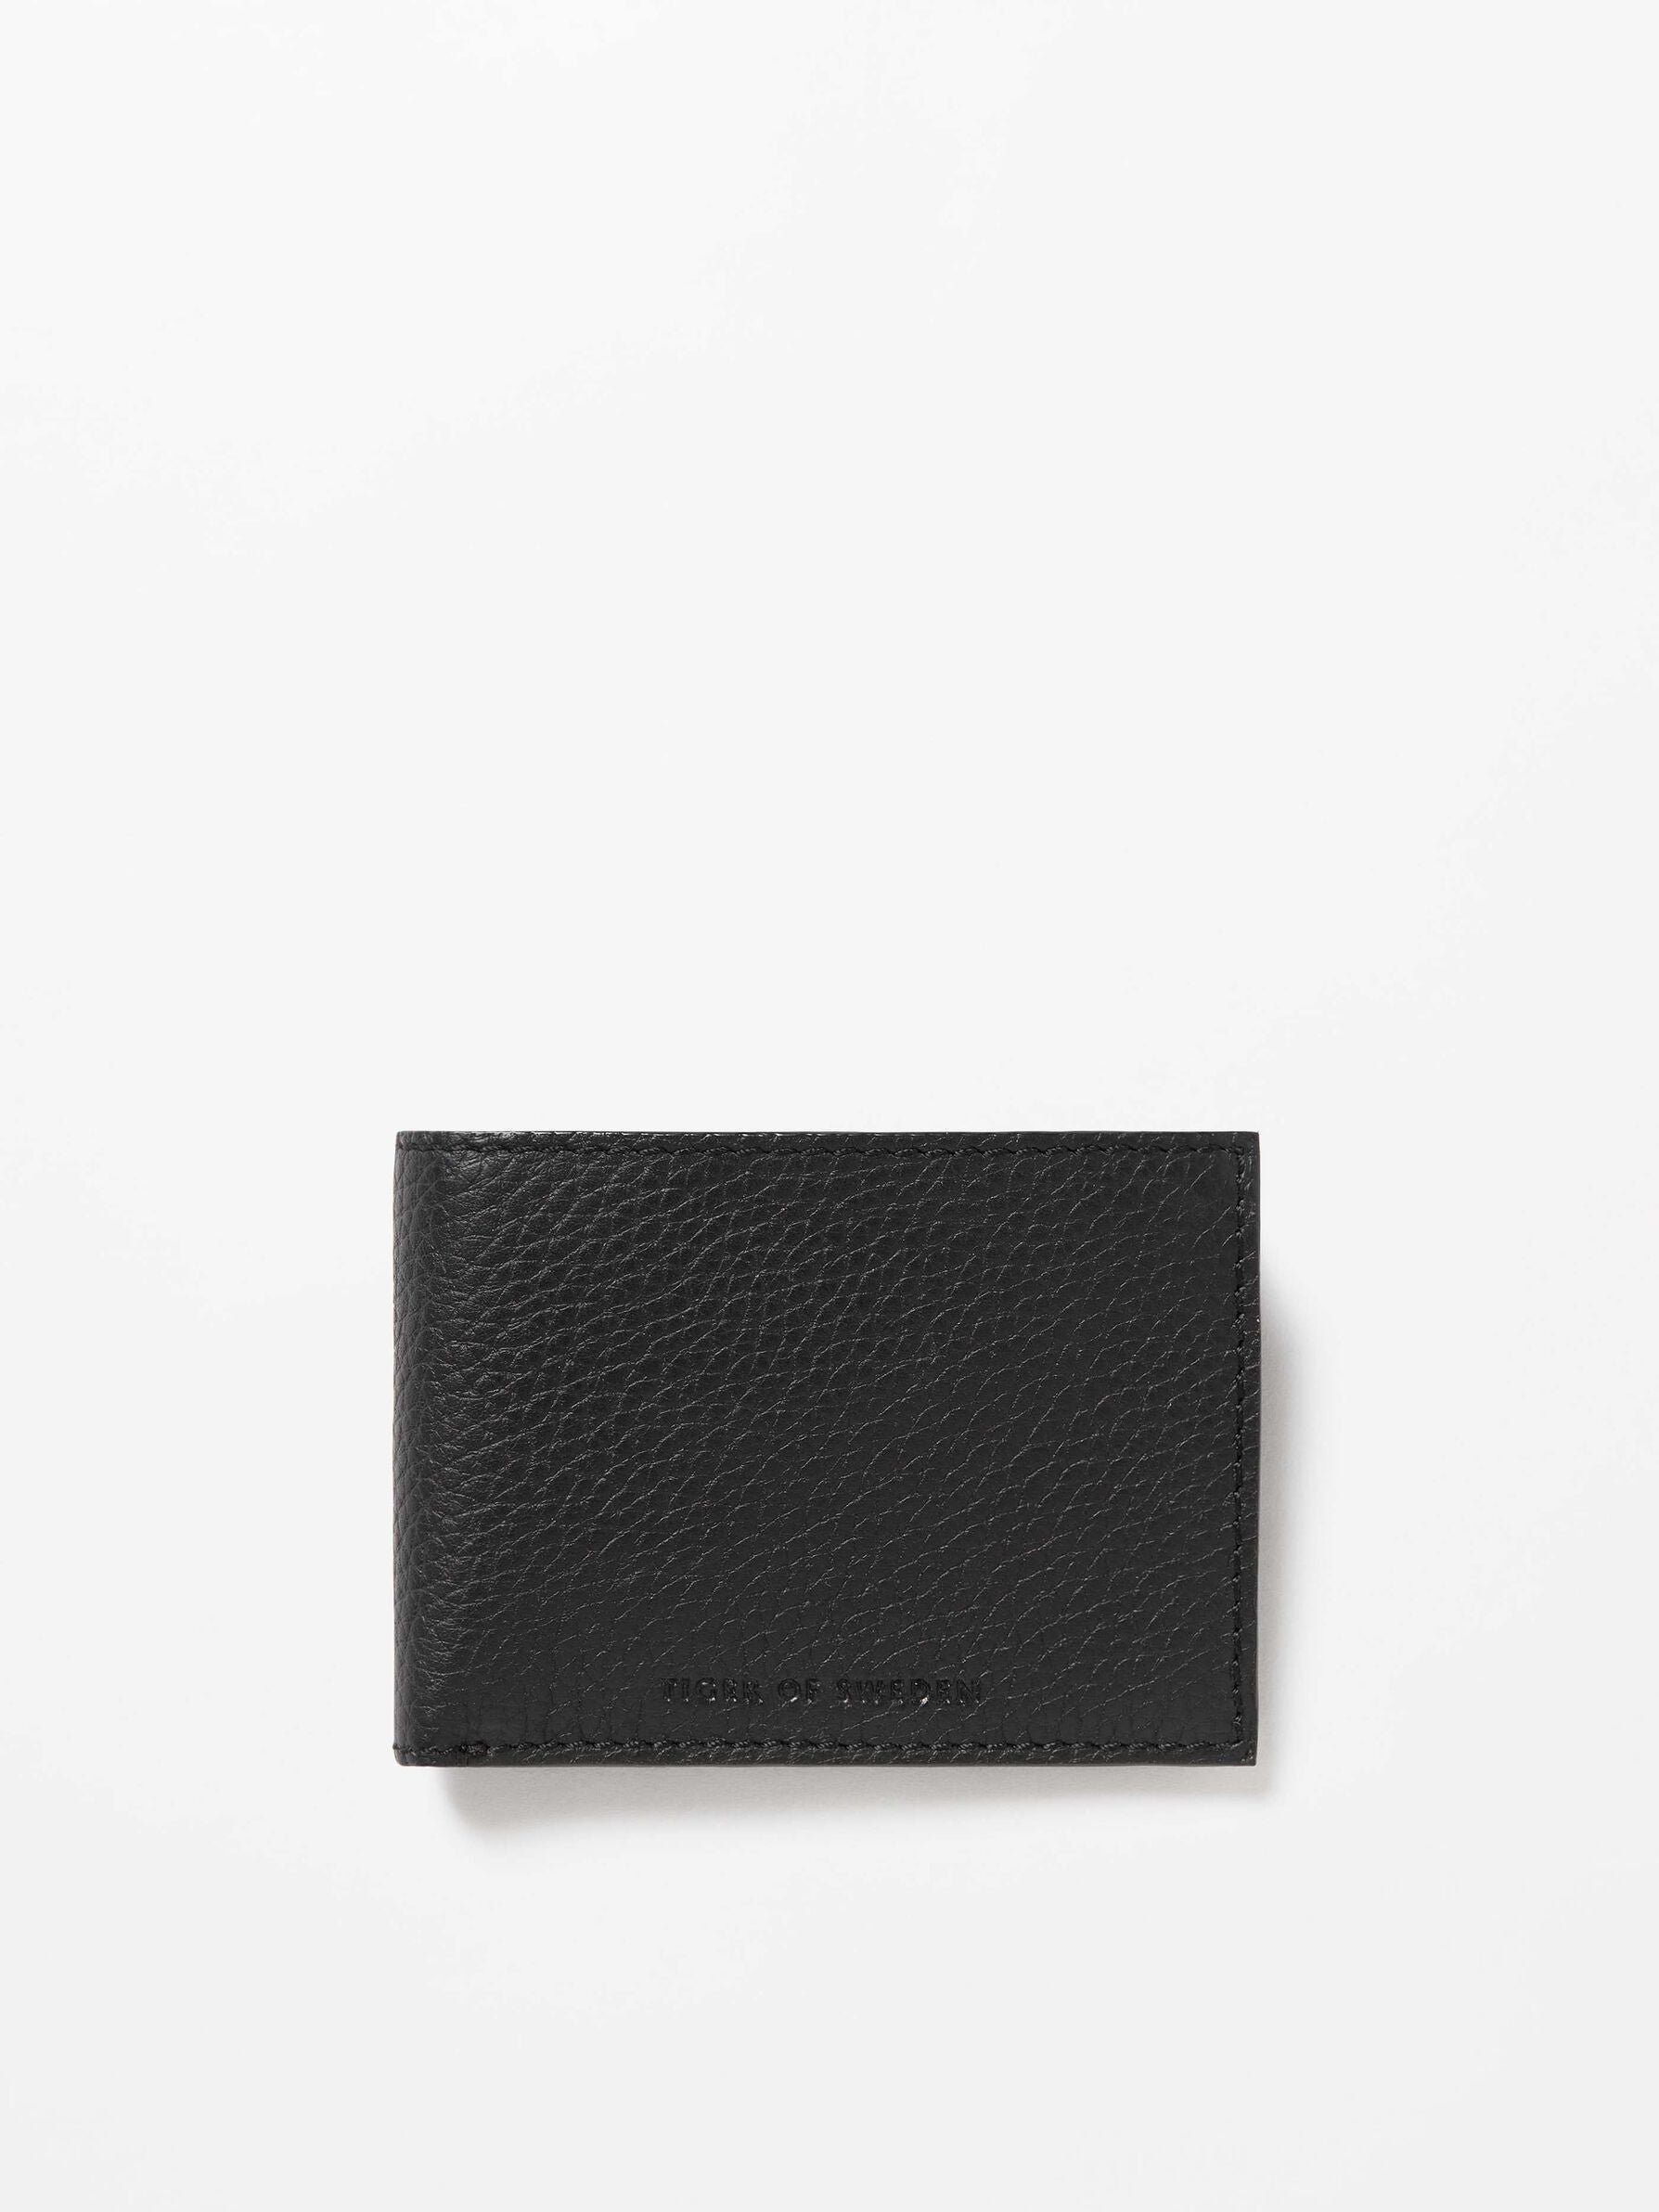 TIGER OF SWEDEN WALD WALLET IN BLACK U69380006Z 050 | Shop from eightywingold an official brand partner for TIGER OF SWEDEN CANADA &amp; US